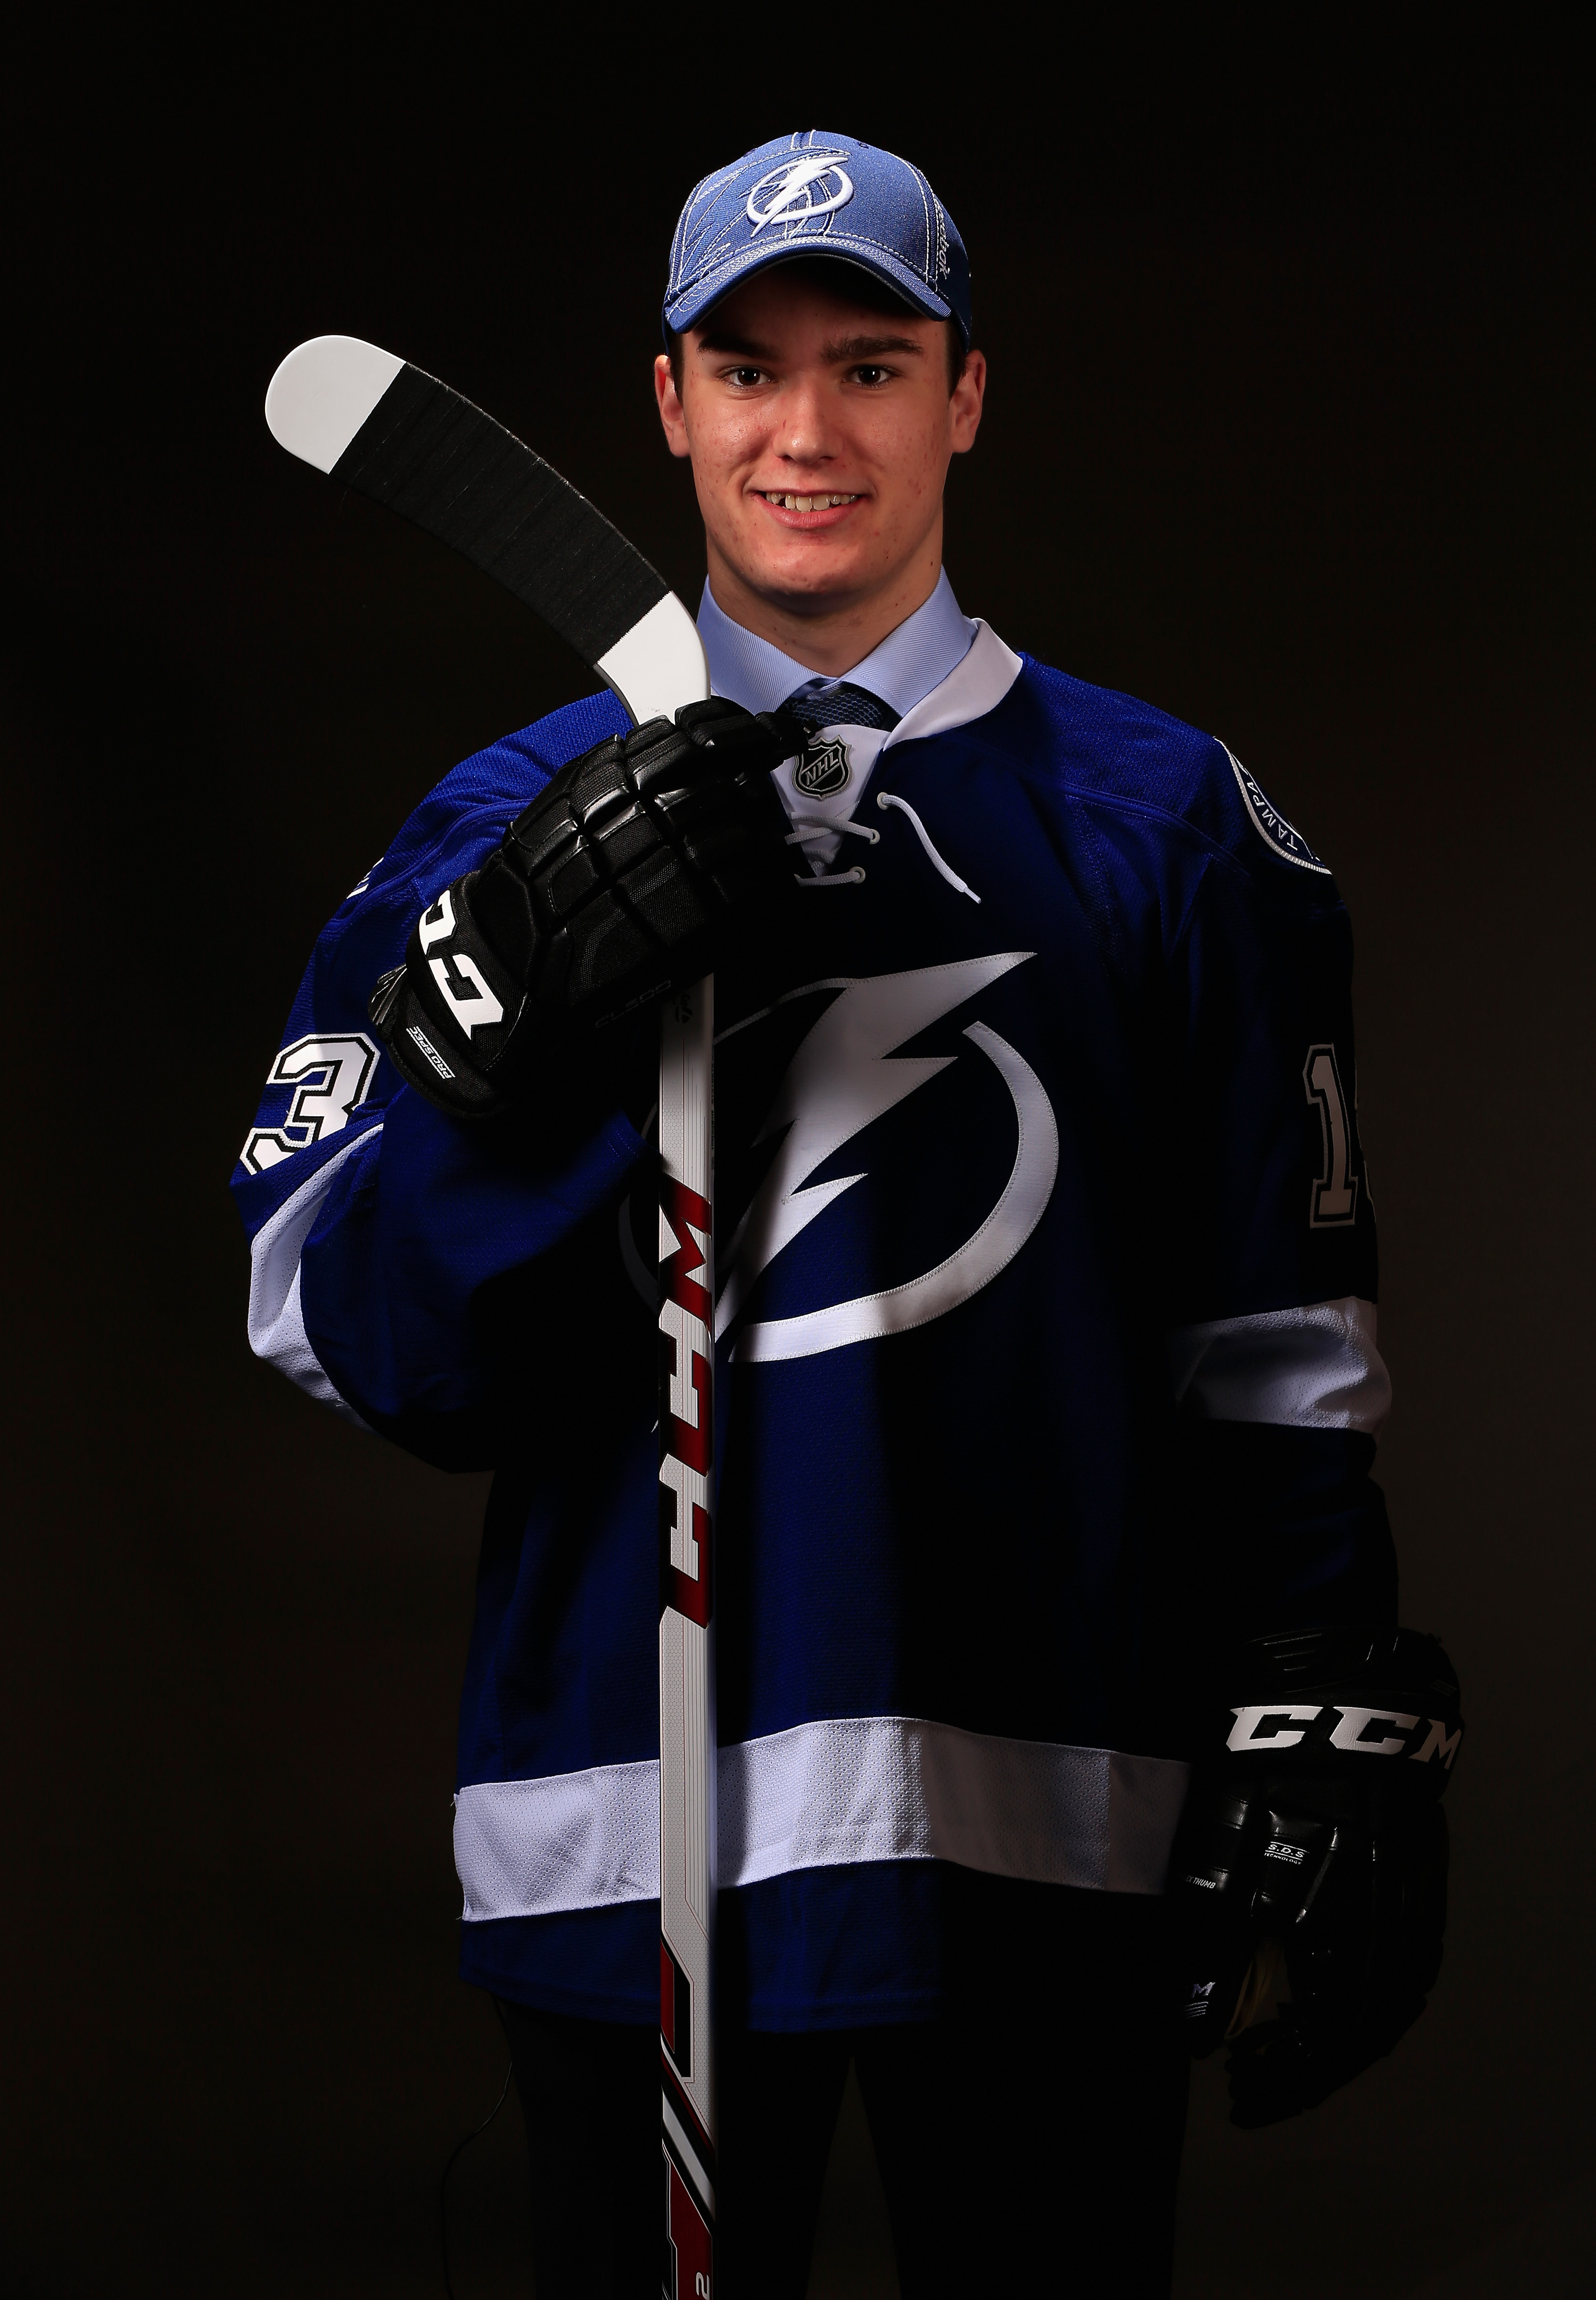 Lightning first round draft choice Jonathan Drouin, one of five forwards selected by Tampa Bay in the 2013 NHL Entry Draft